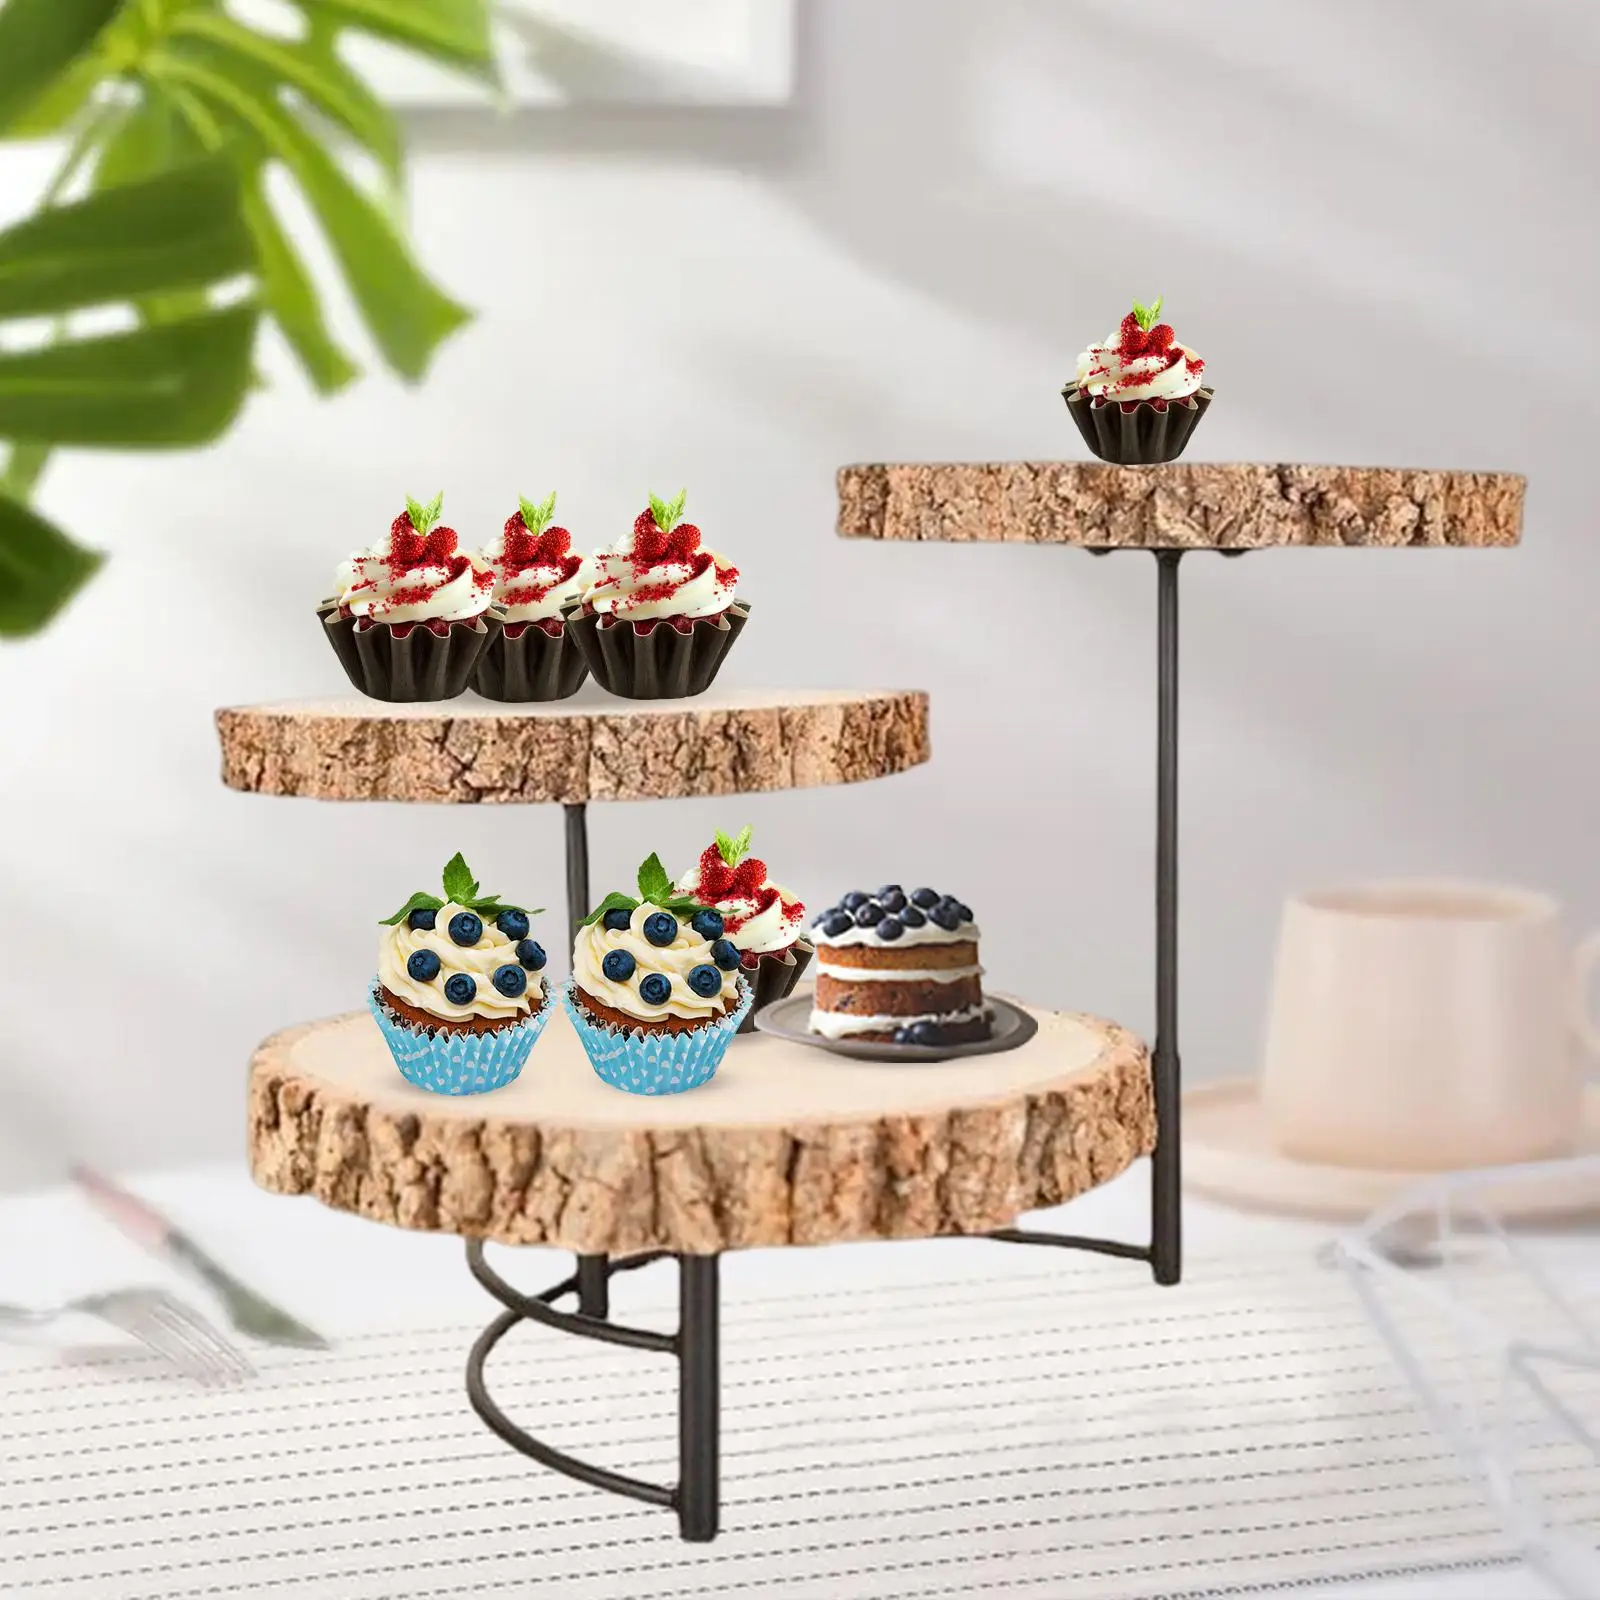  Cake Stands 3 Layer Serving Platter Dessert Display Stand Round Fruit Dessert   Tool Cake Plate Stand Party Birthday Cake